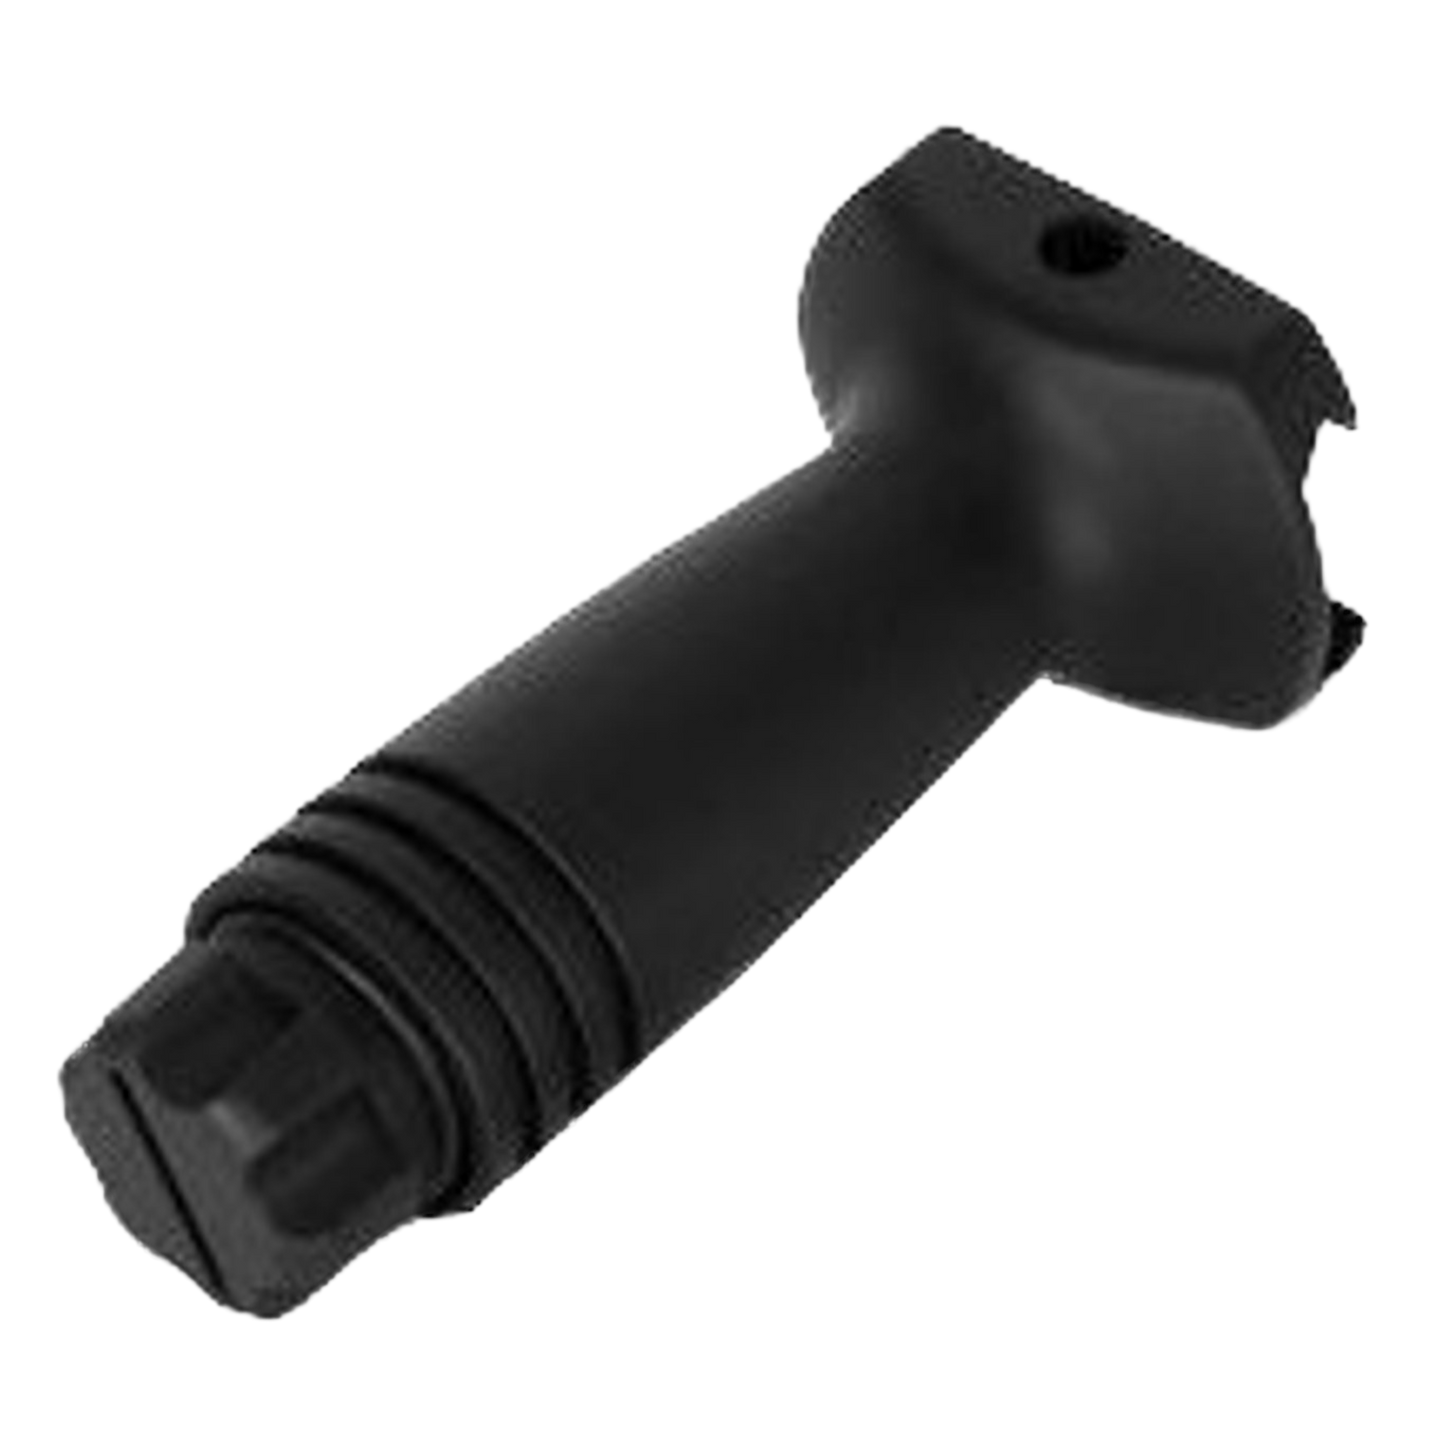 Rail Mounted Vertical Foregrip